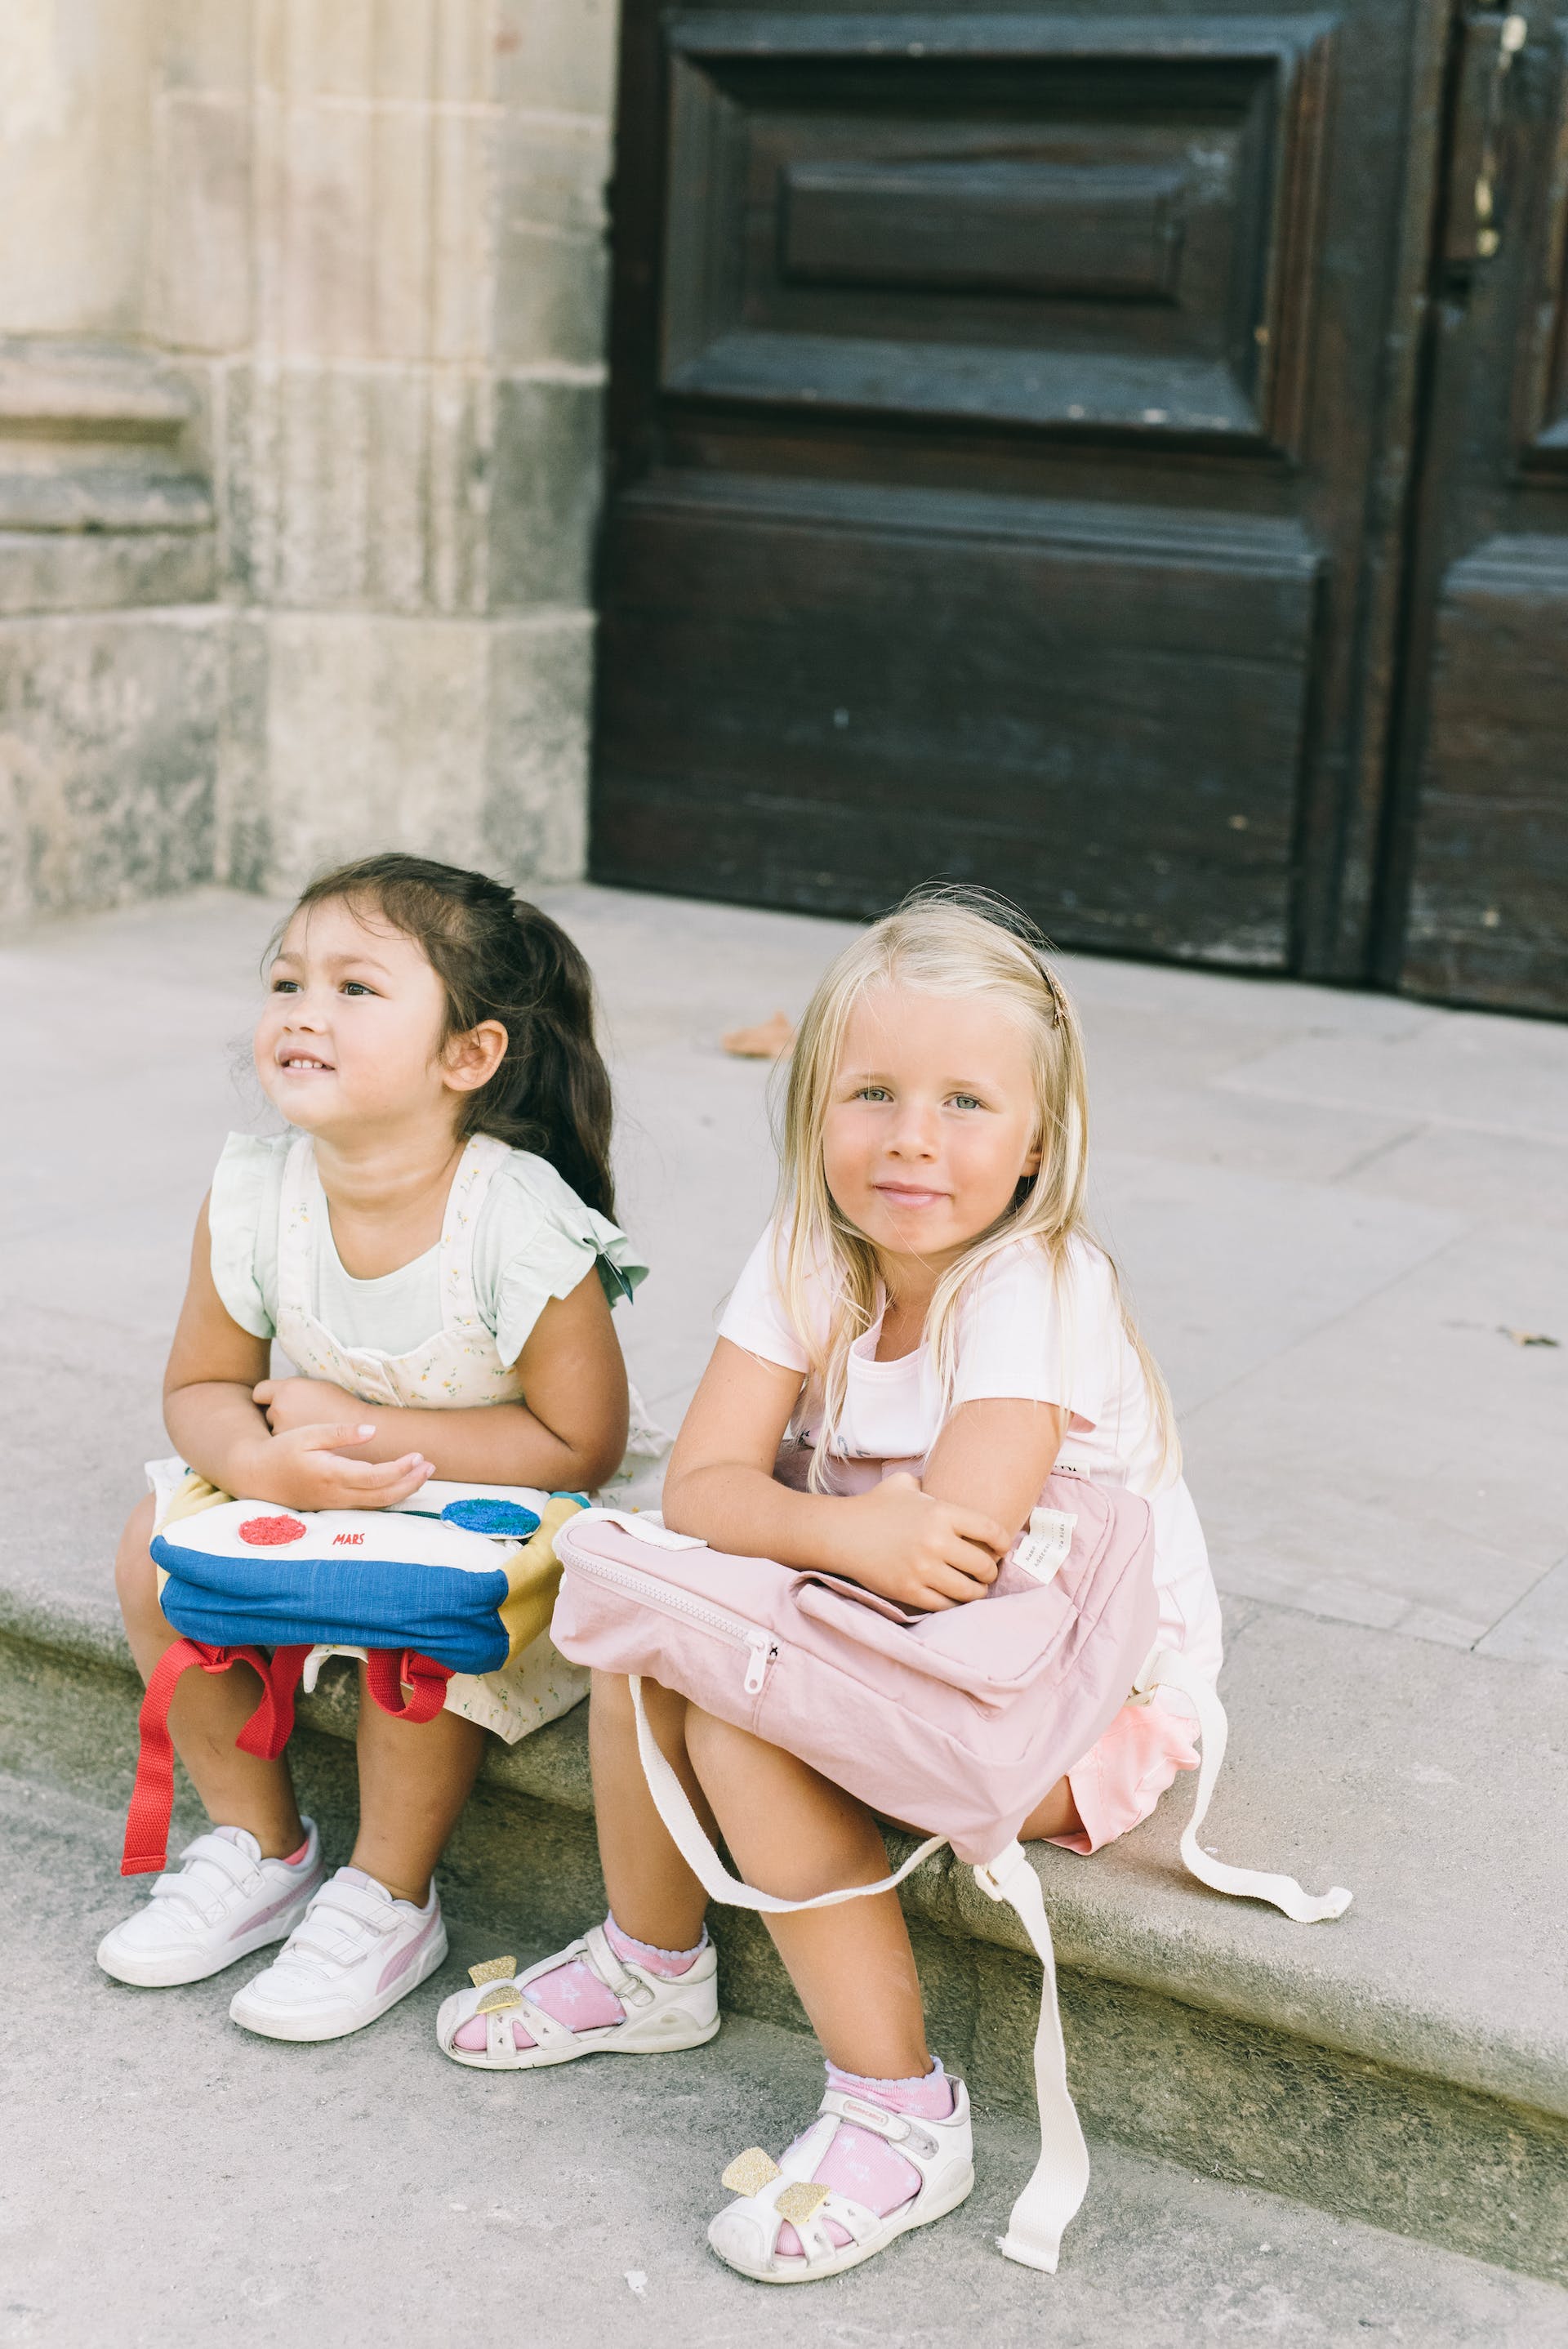 Little girls with backpacks | Source: Pexels